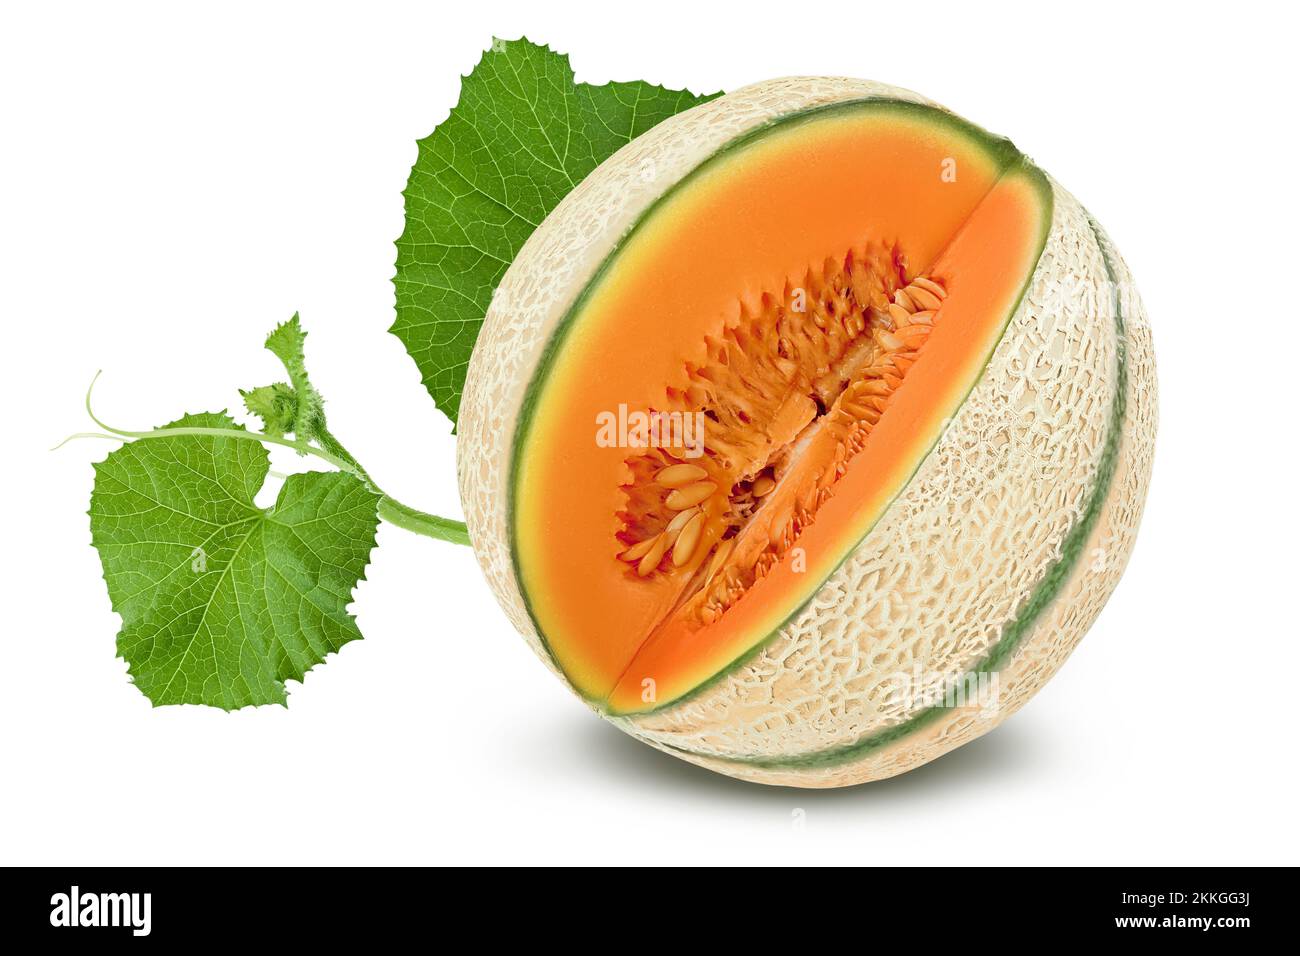 Cantaloupe melon isolated on white background with full depth of field, Stock Photo